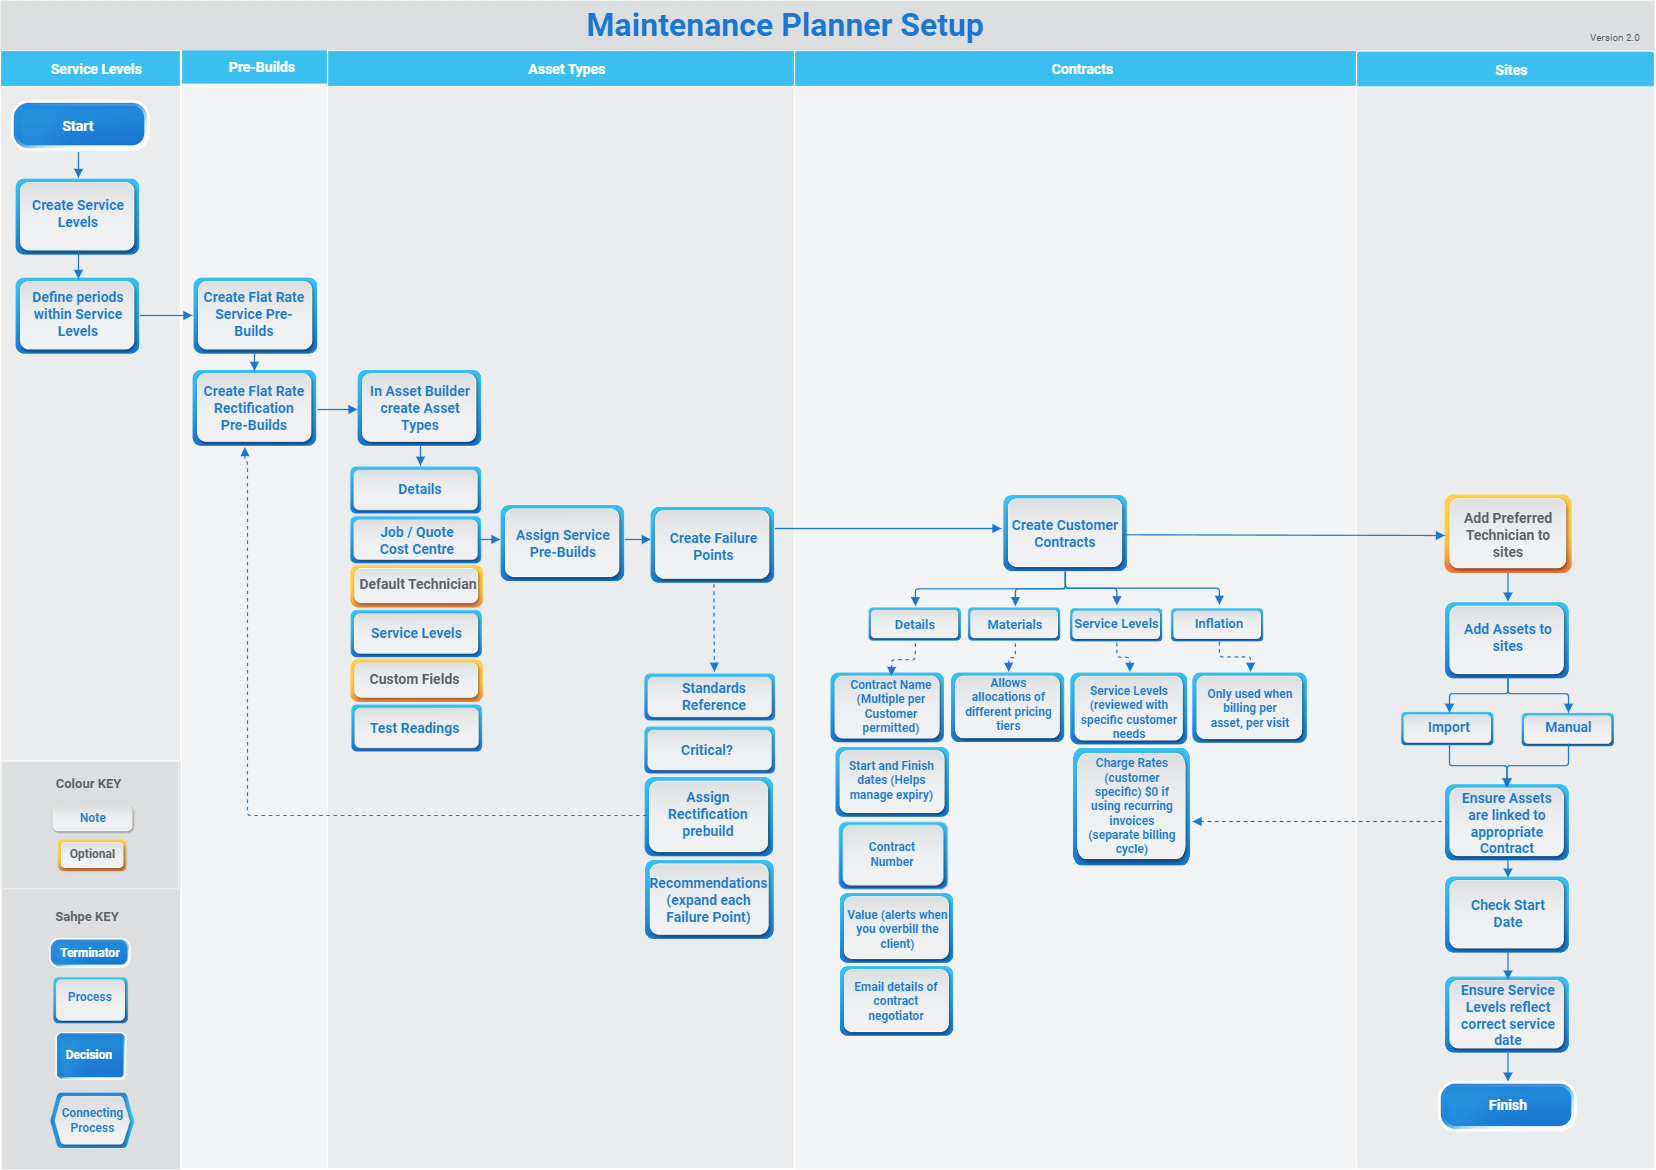 The recommended maintenance planner setup workflow.